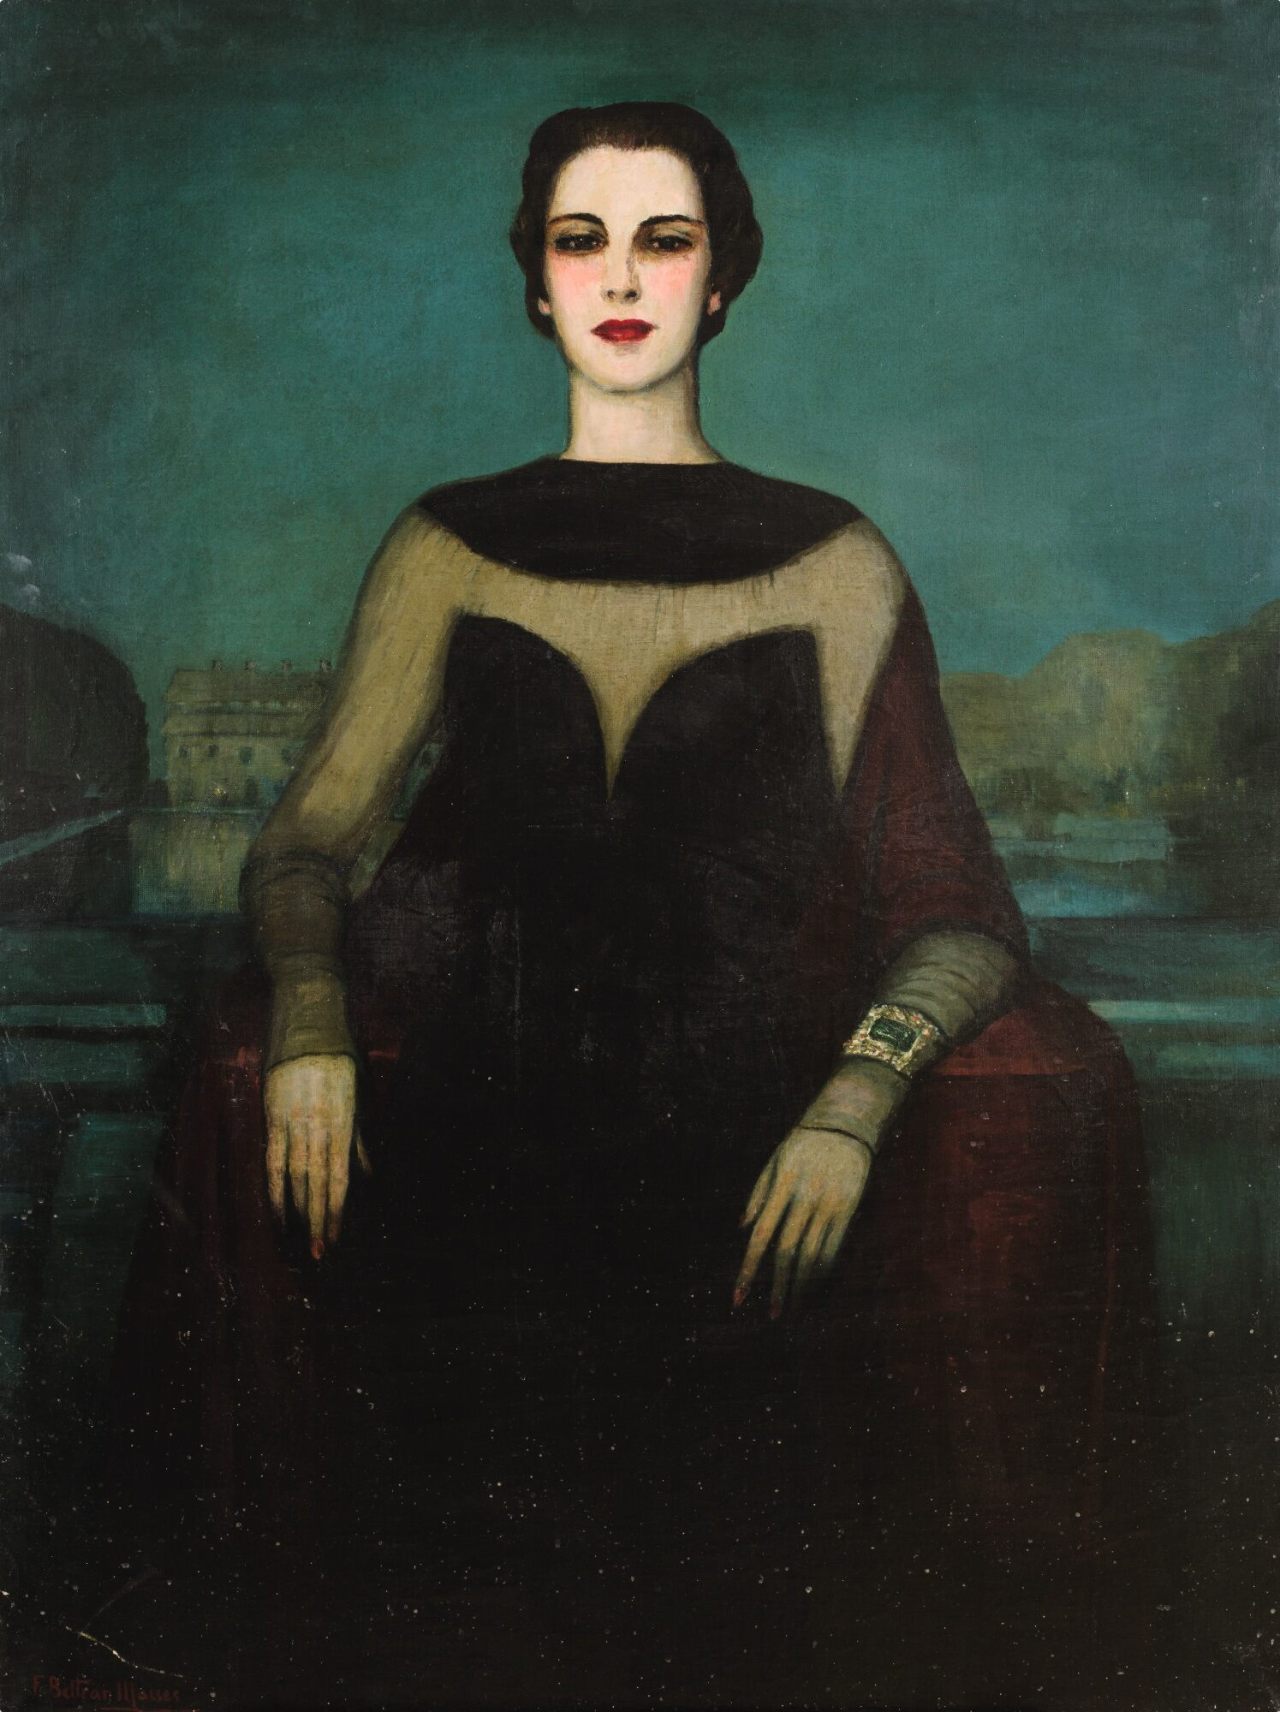 Portrait of a Woman in Black. Federico Beltrán Massés (Spanish, 1885-1949). Oil on canvas.
The immediate success of Beltran Masses’ 1929 exhibition in London at the New Burlington Galleries owed much to the art historian and critic for The Observer...